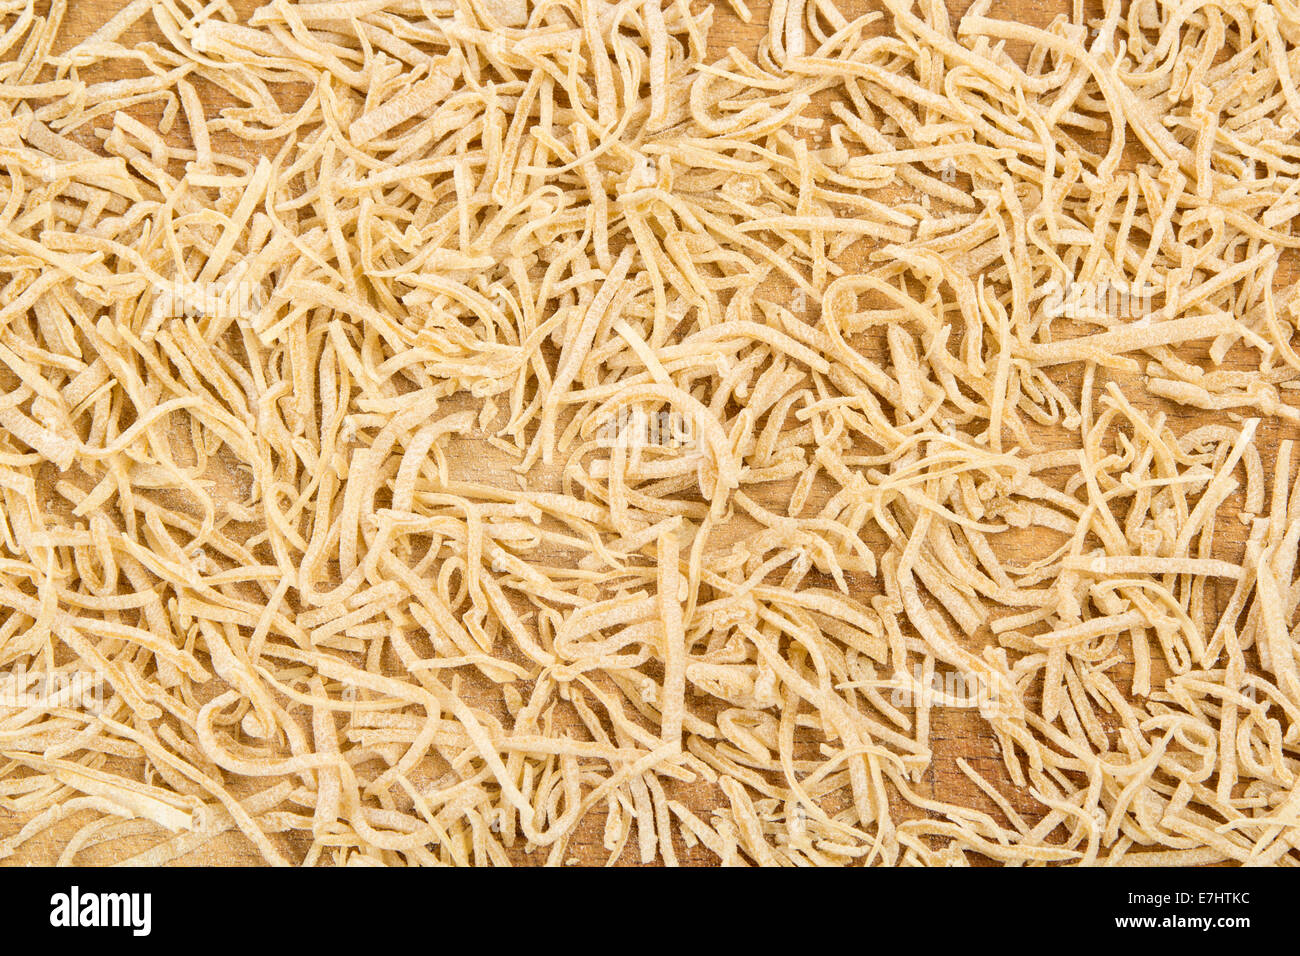 Scattered short dried noodles from above Stock Photo